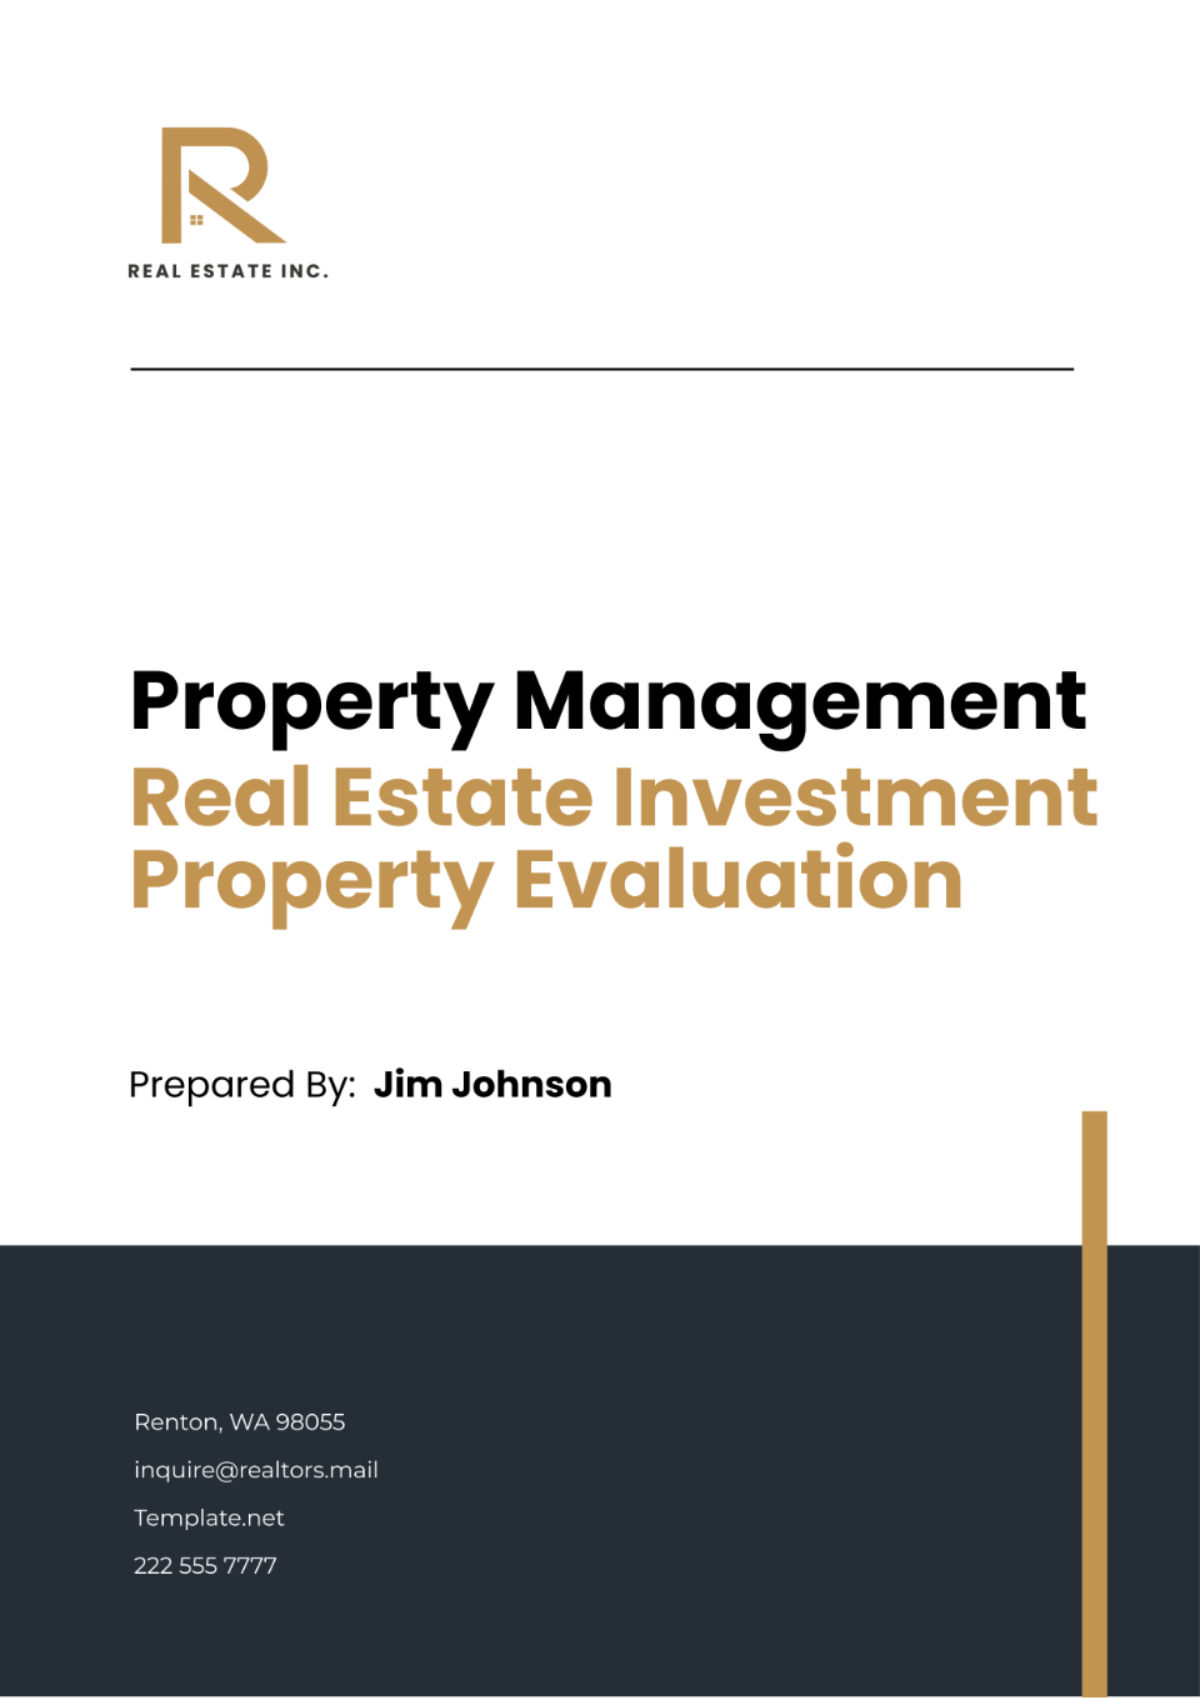 Real Estate Investment Property Evaluation Template